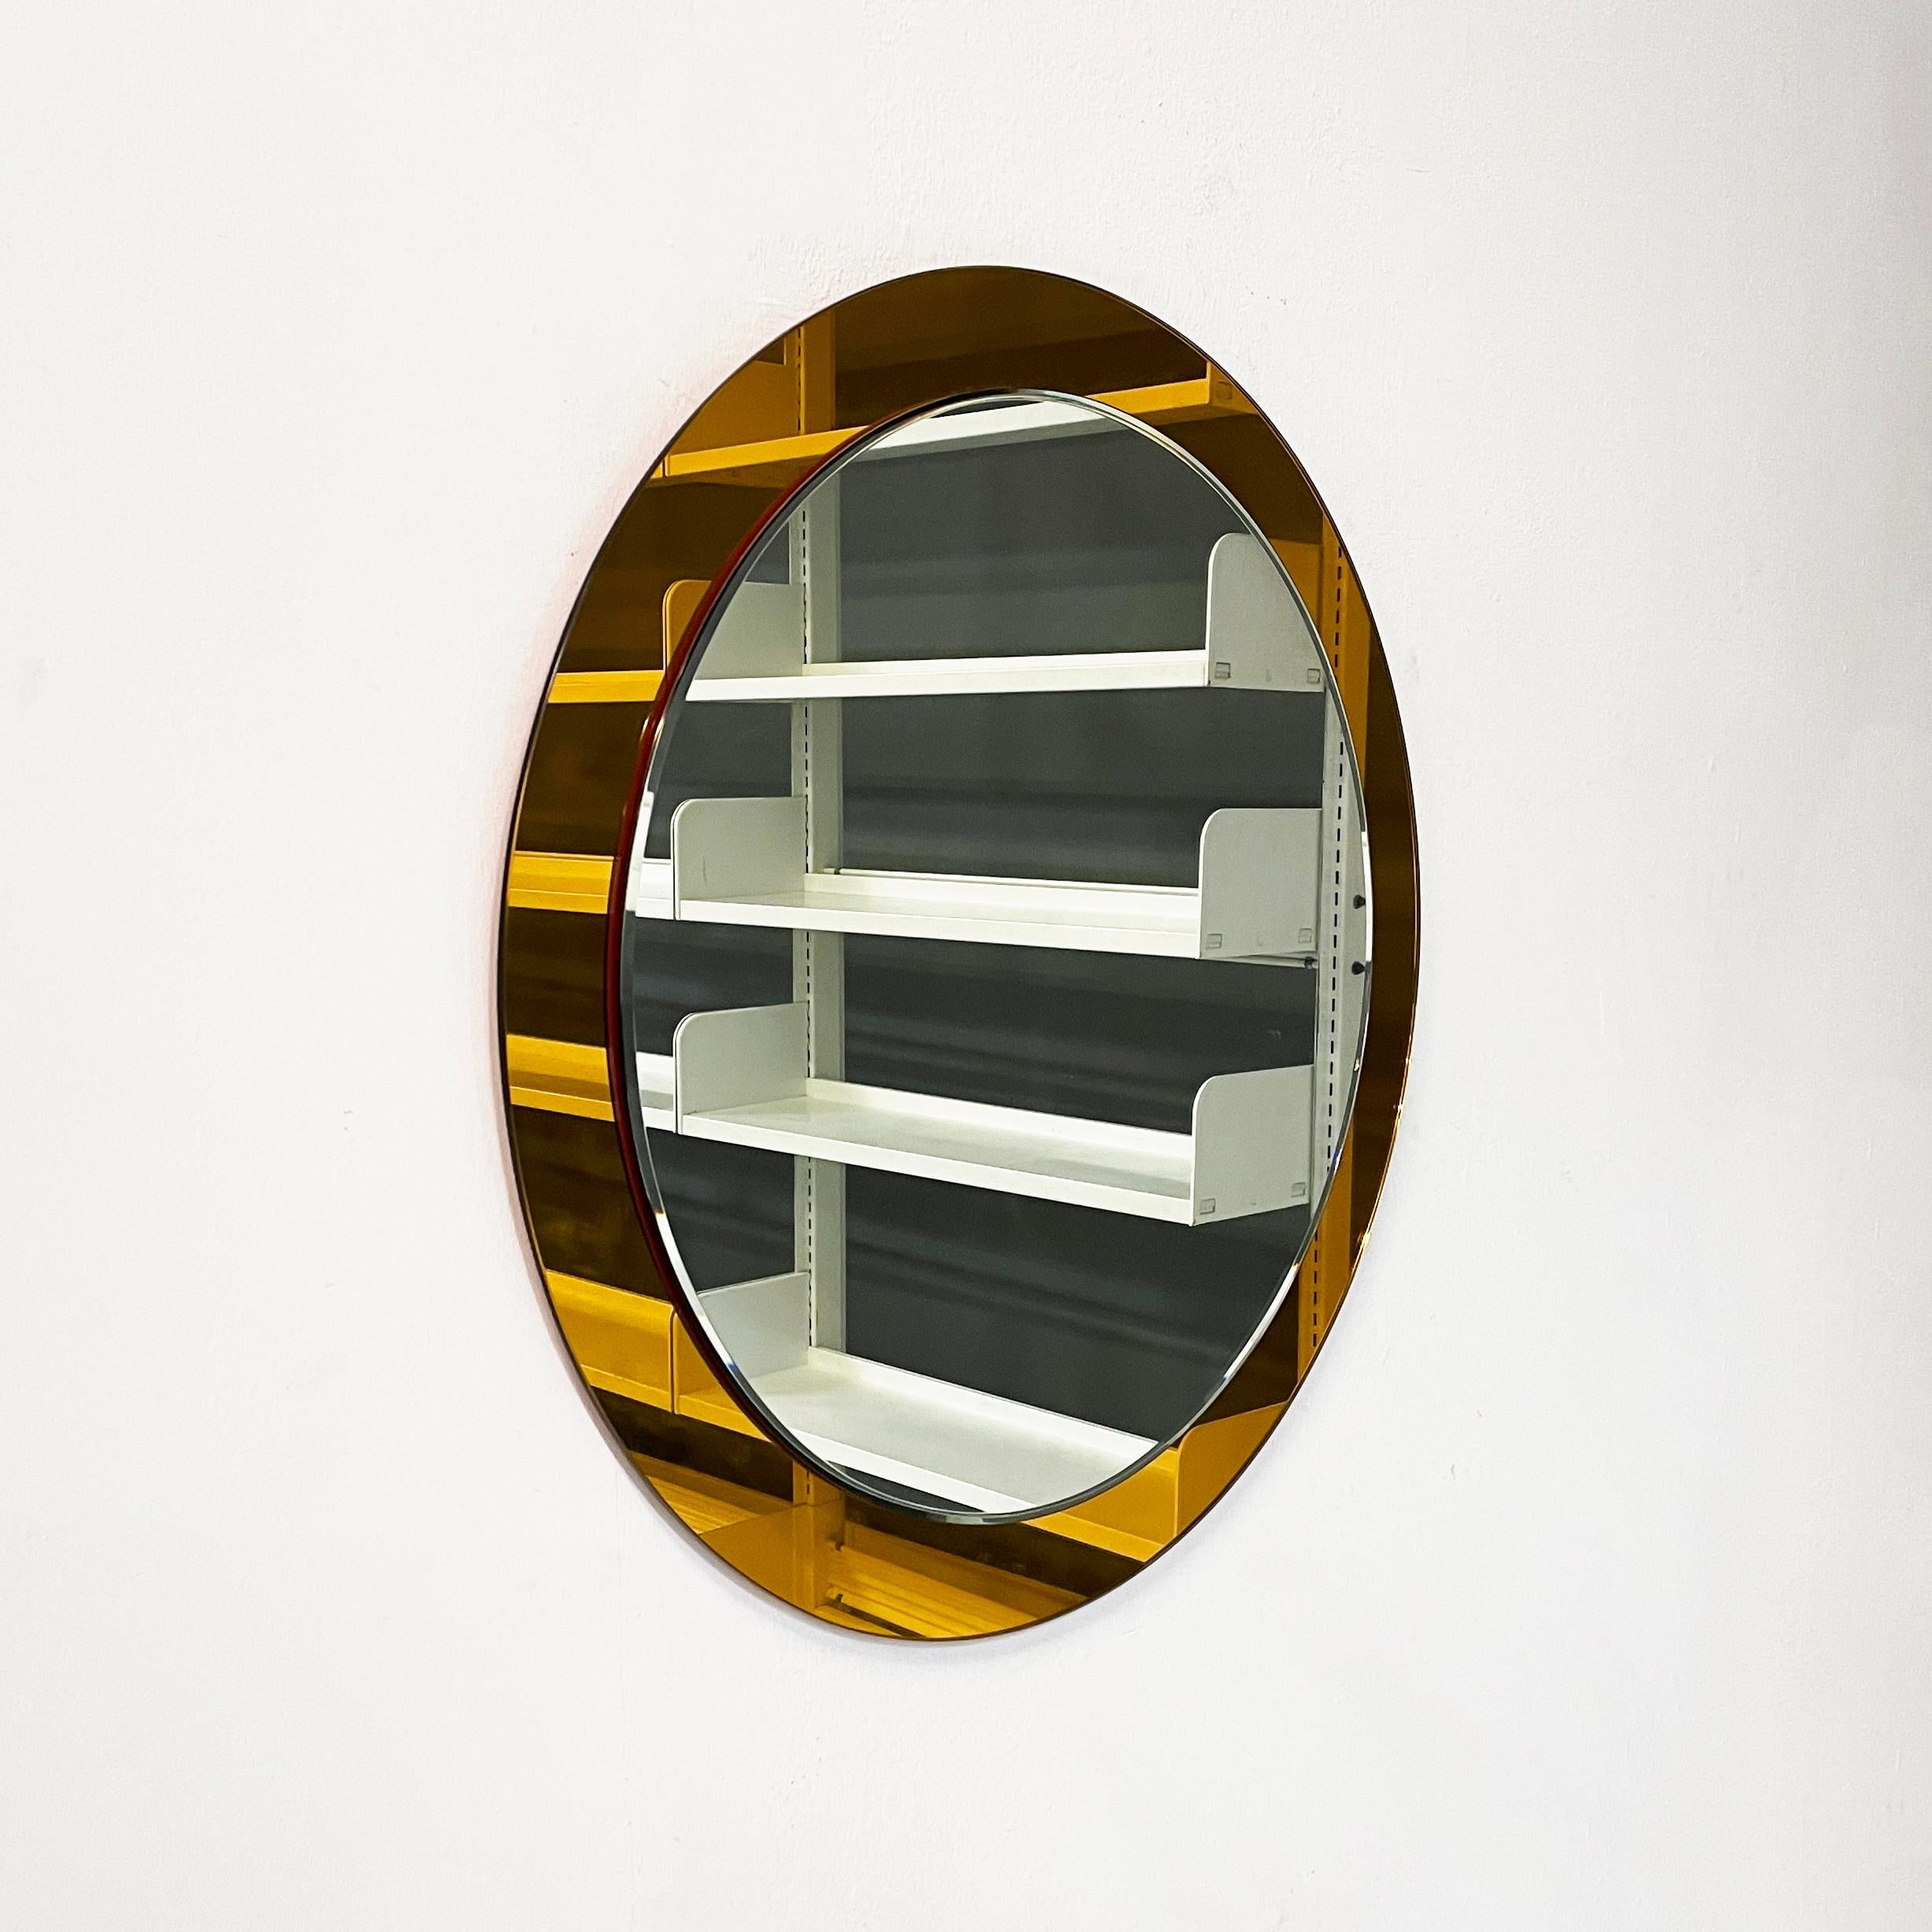 Italian mid-century modern wall mirror with yellow mirror frame, 1960s
Fantastic round wall mirror with yellow mirror frame.
1960 approx.
Very good condition
Measurements in cm 89x3h
This vintage round wall mirror is suitable both for a formal place